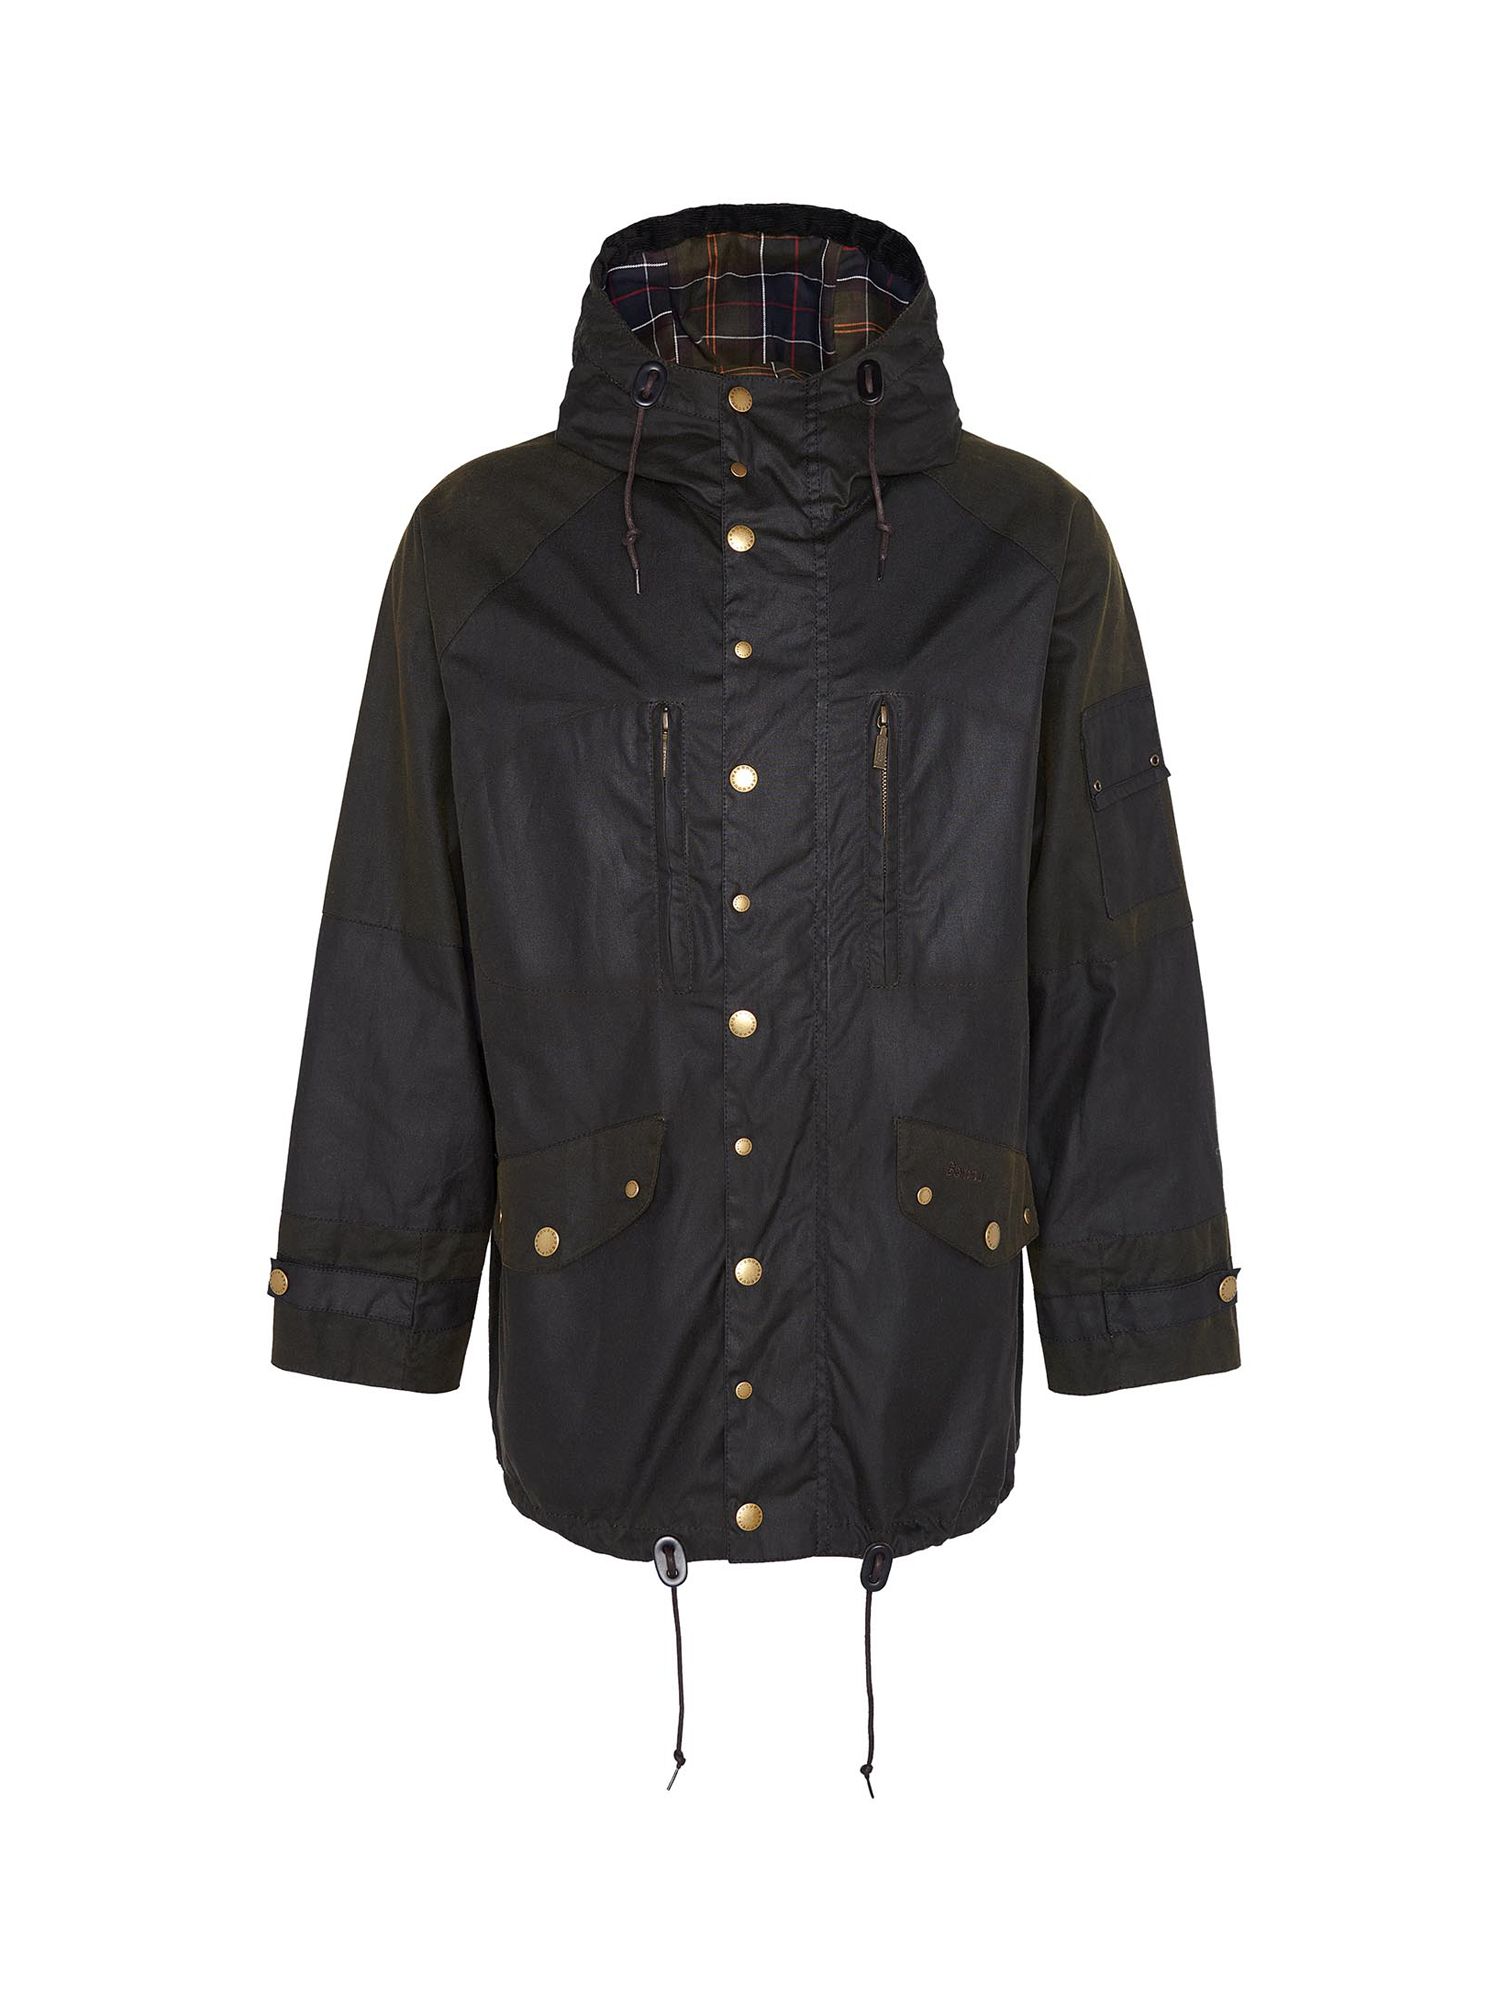 Barbour Tomorrow's Archive Wax Jacket, Olive at John Lewis & Partners